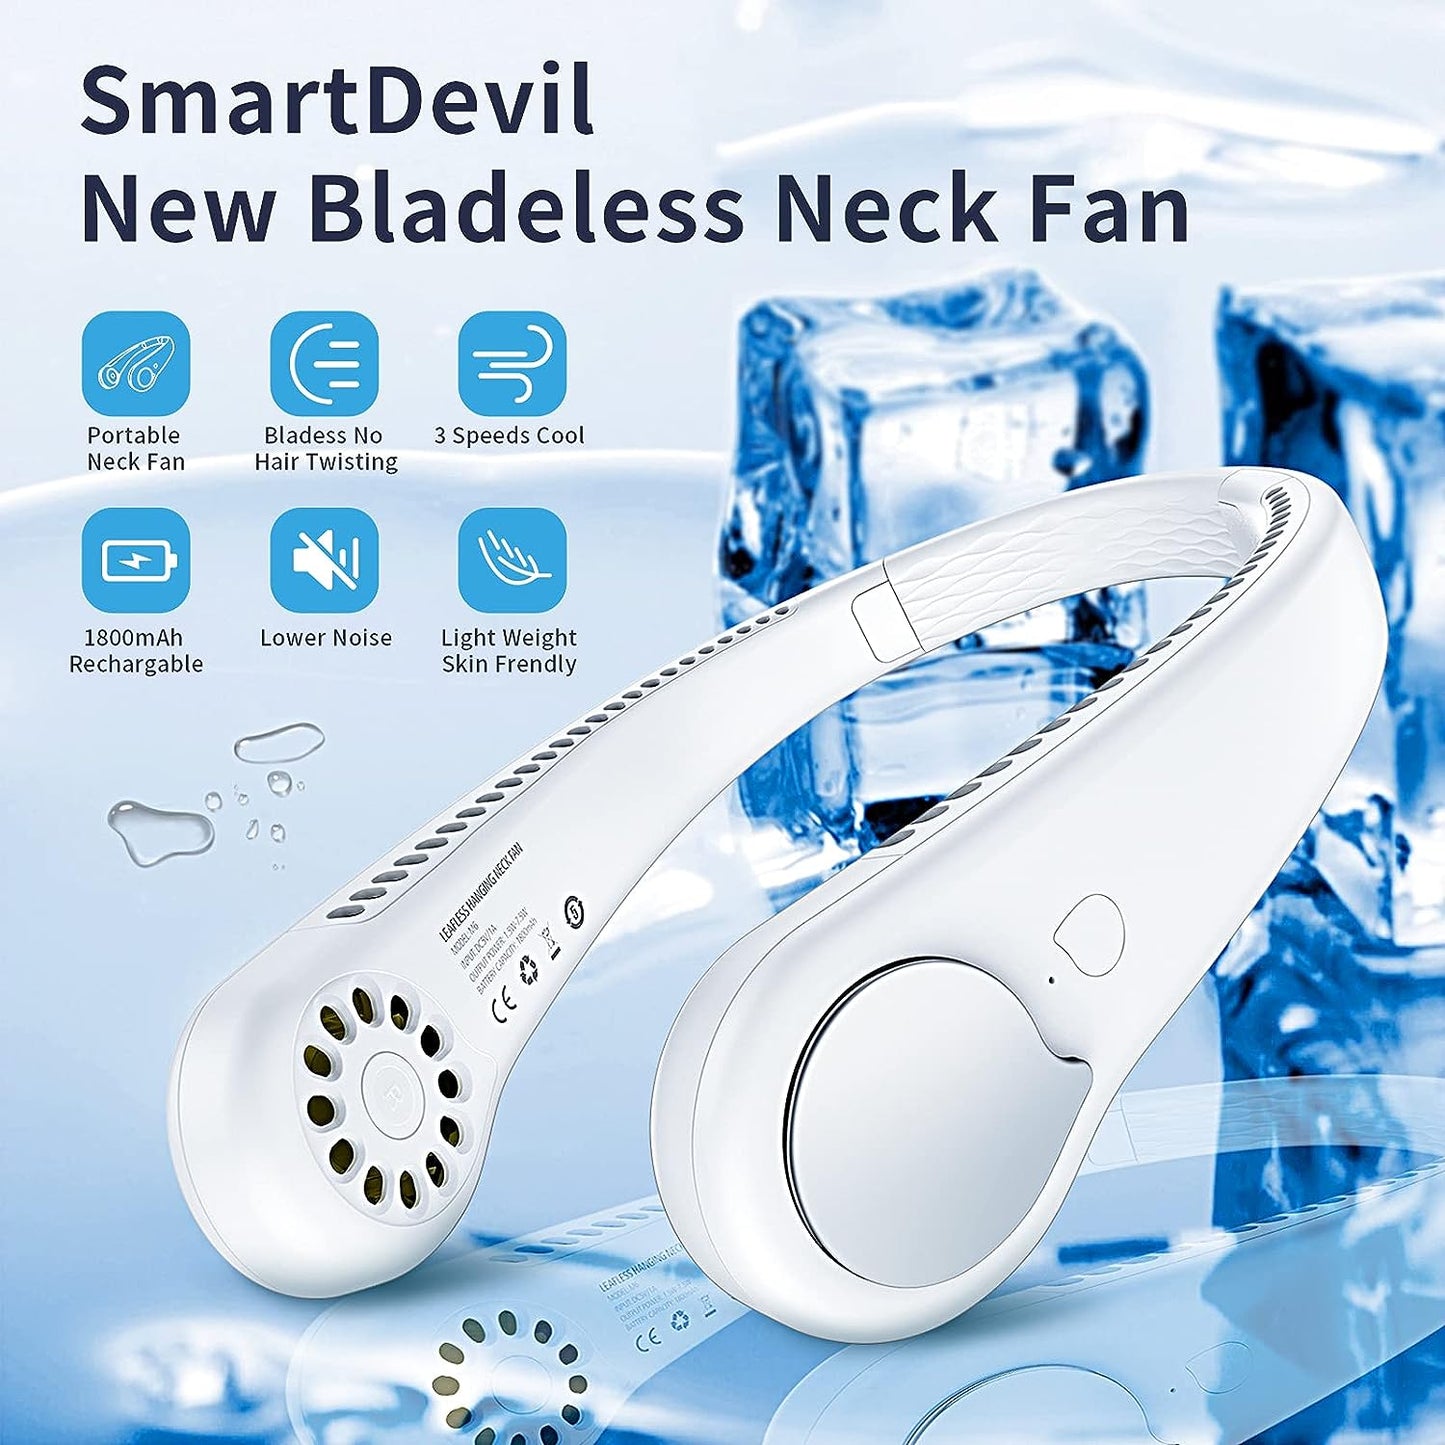 SMARTDEVIL Neck Fan, Bladeless Mini USB Neckband Fan Rechargeable, 360°Cooling Portable Hanging Fan 3 Speeds with 48 Air Outlet, Wearable Necklance Fan for Sports, Travel, Outdoor (White)